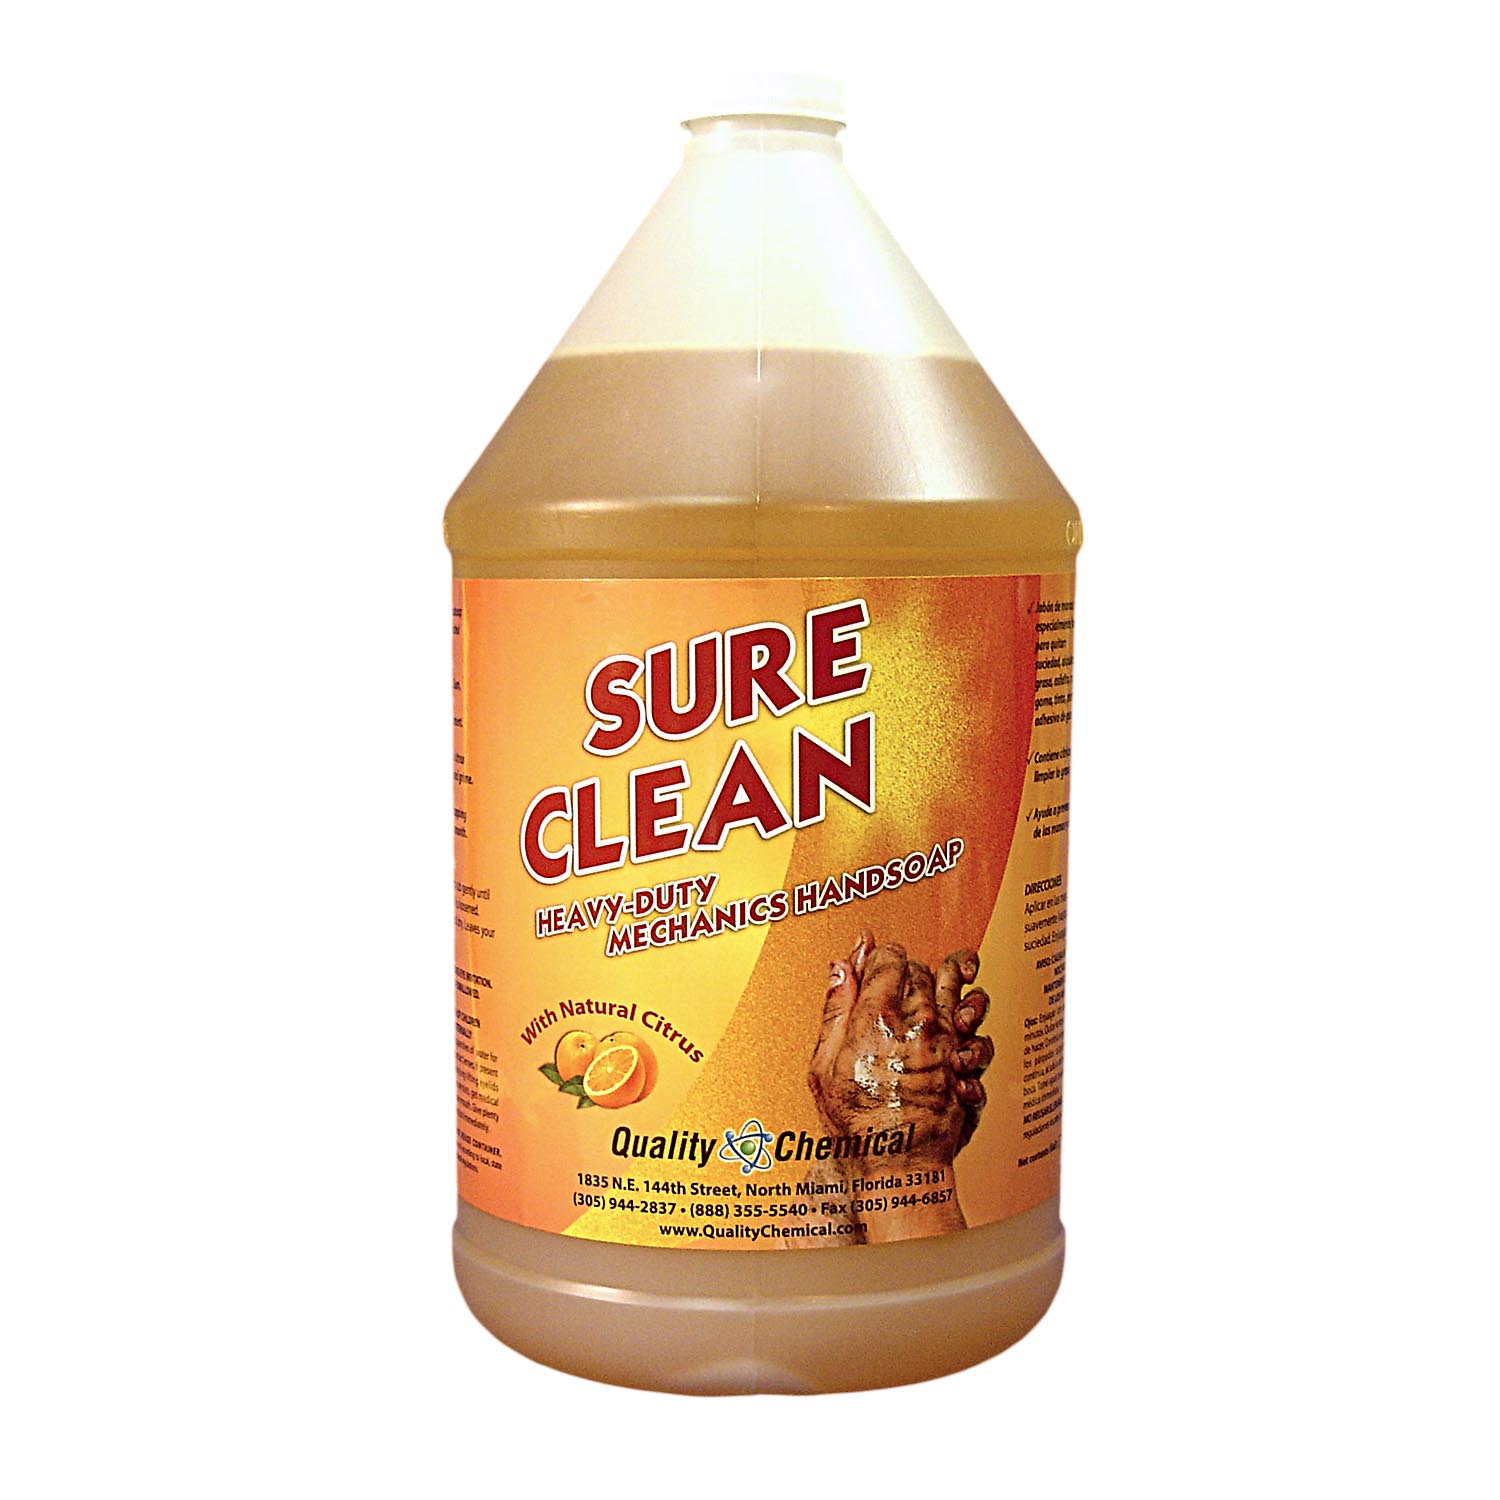 https://www.qualitychemical.com/shared/images/products/ChemicalsNEW/QCC_266_Sure_clean_1g.jpg